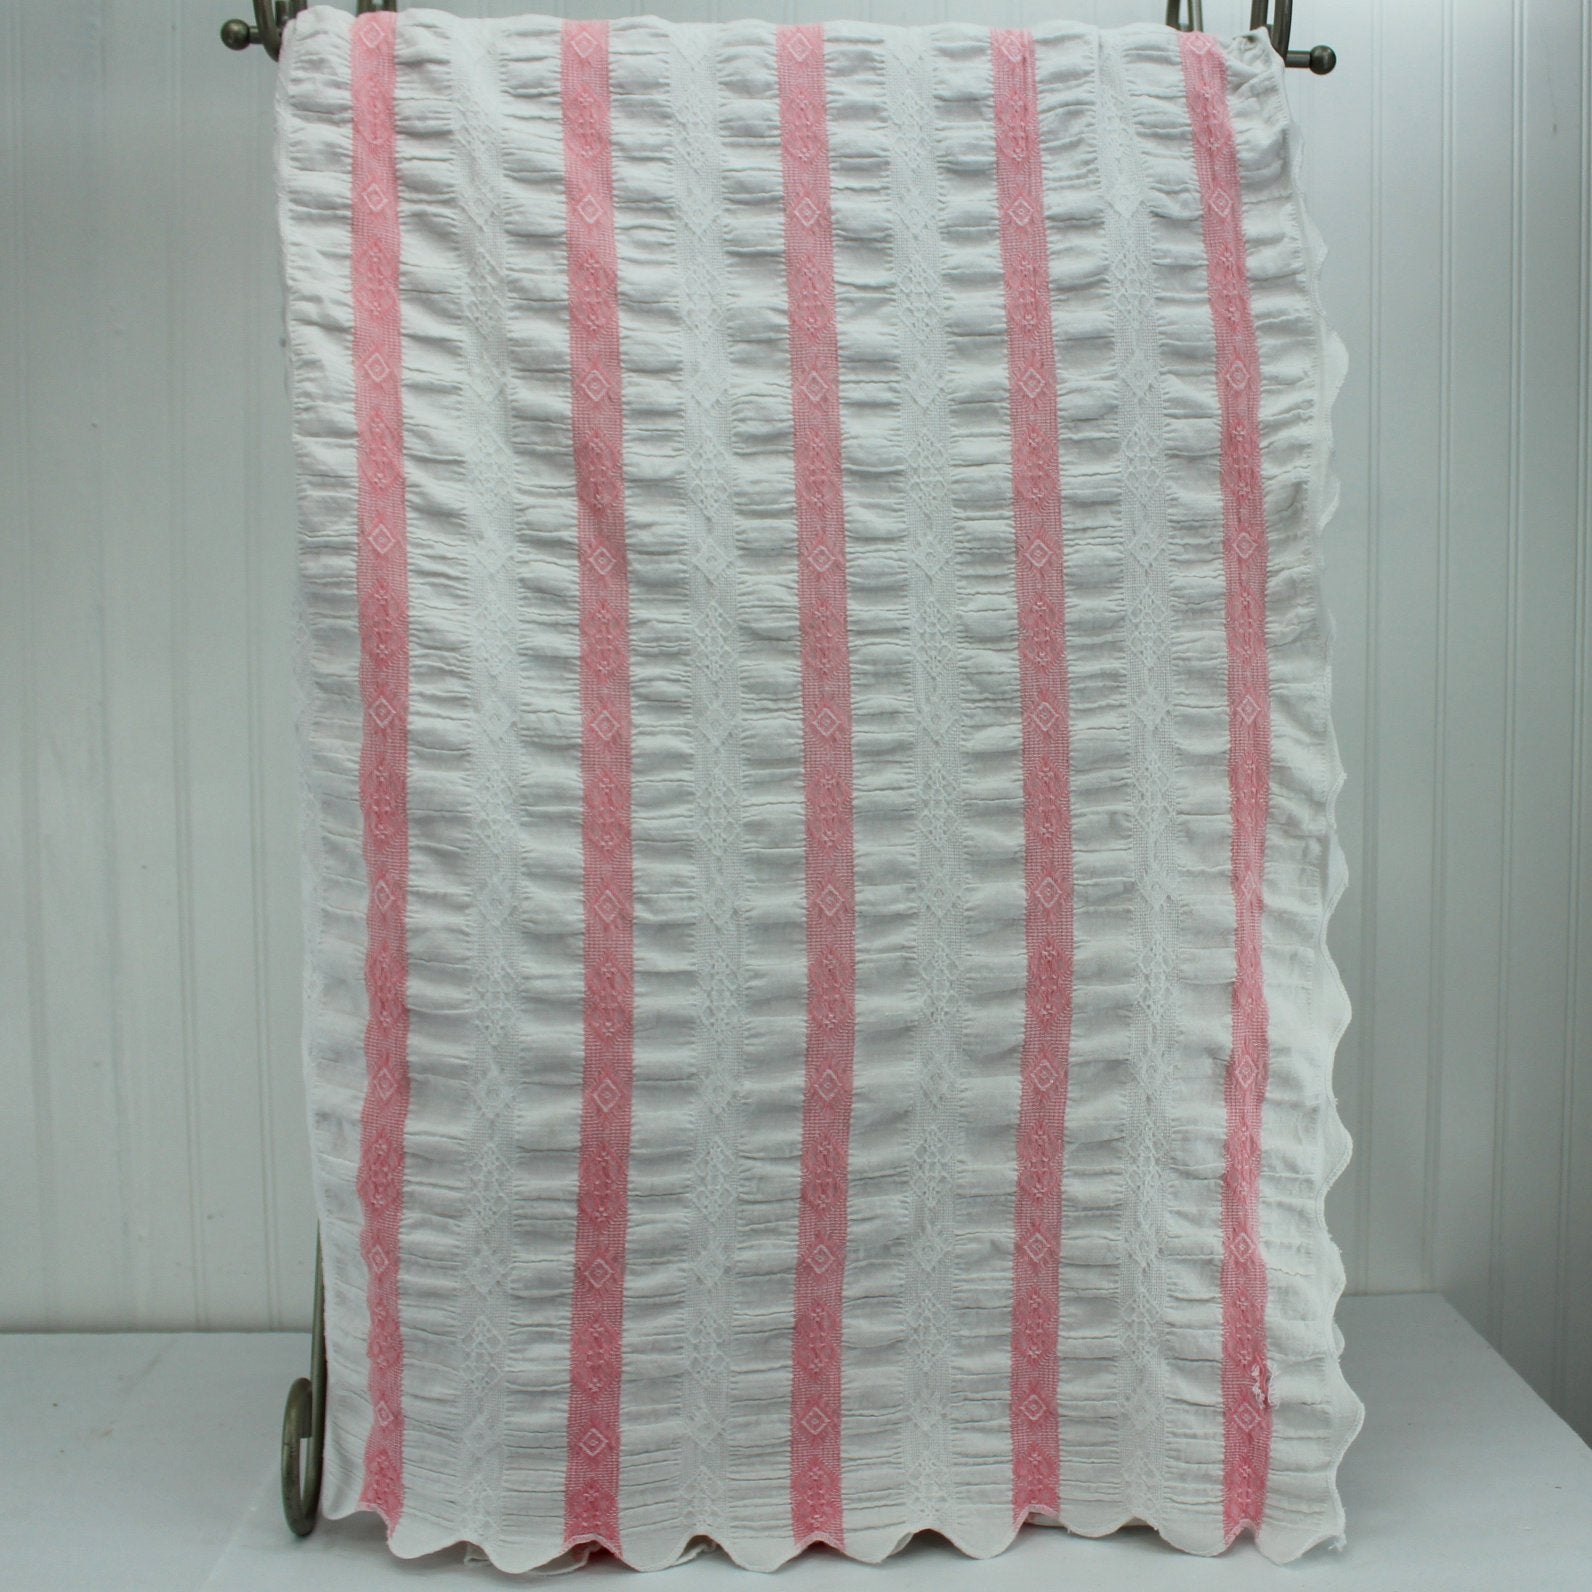 Unusual Ruched Cotton Coverlet Bedspread White Pink Woven Stripe Scalloped Use DIY 1/2 length view 